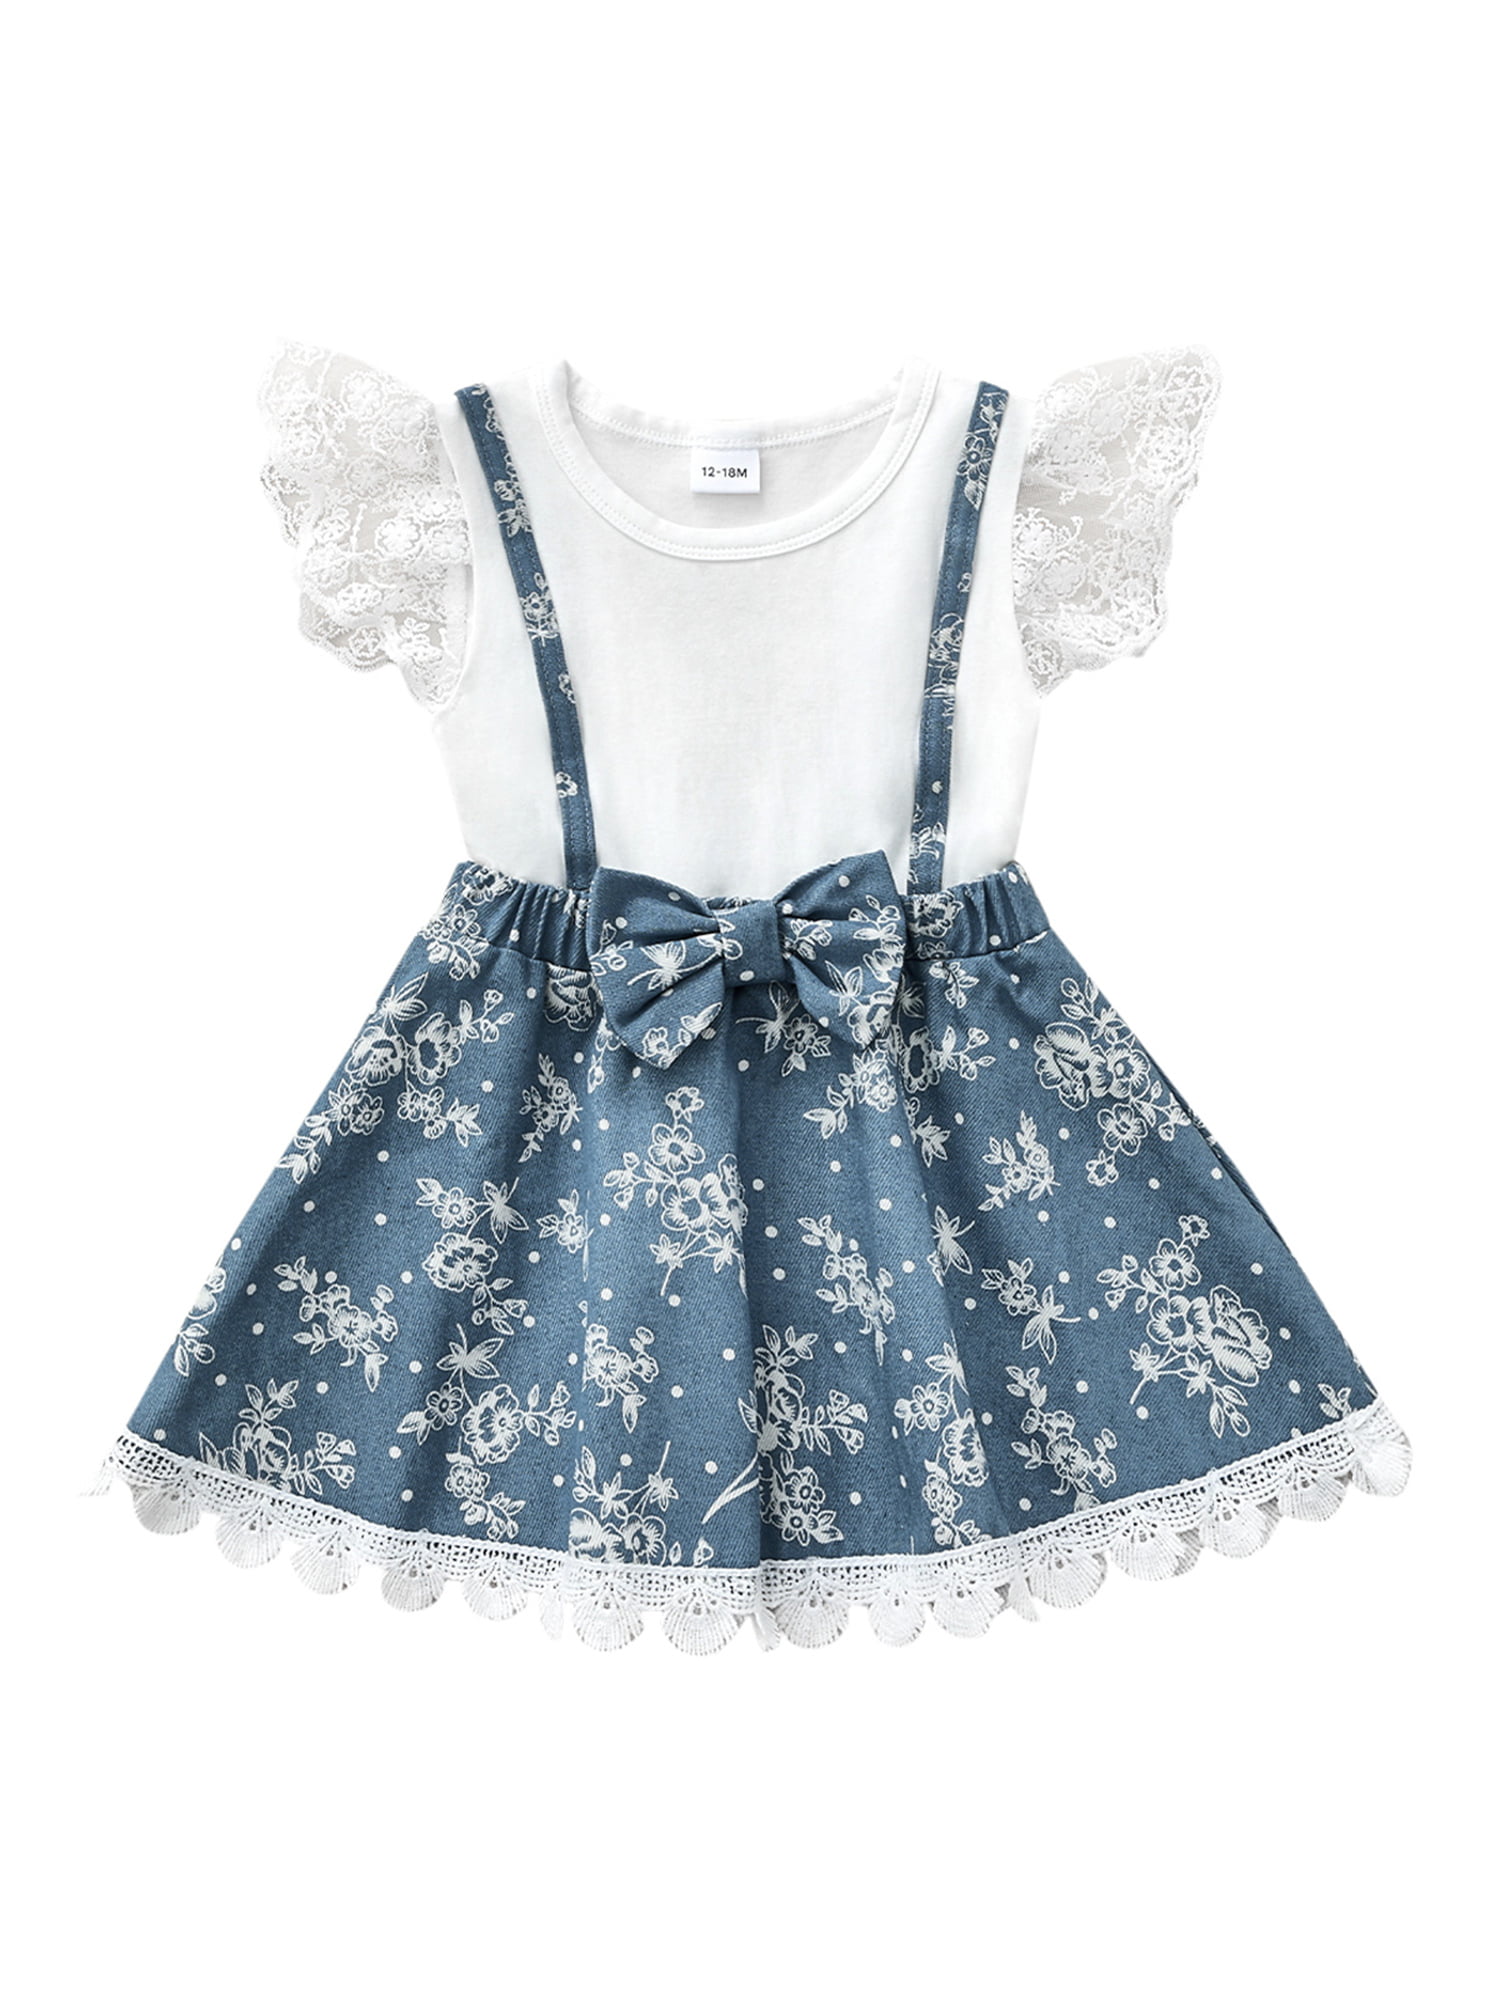 Toddler Baby Girls Summer Outfit Clothes Fly Sleeve Vintage Floral Print Ruffle Rim Skirt Sundress Boho Dress 